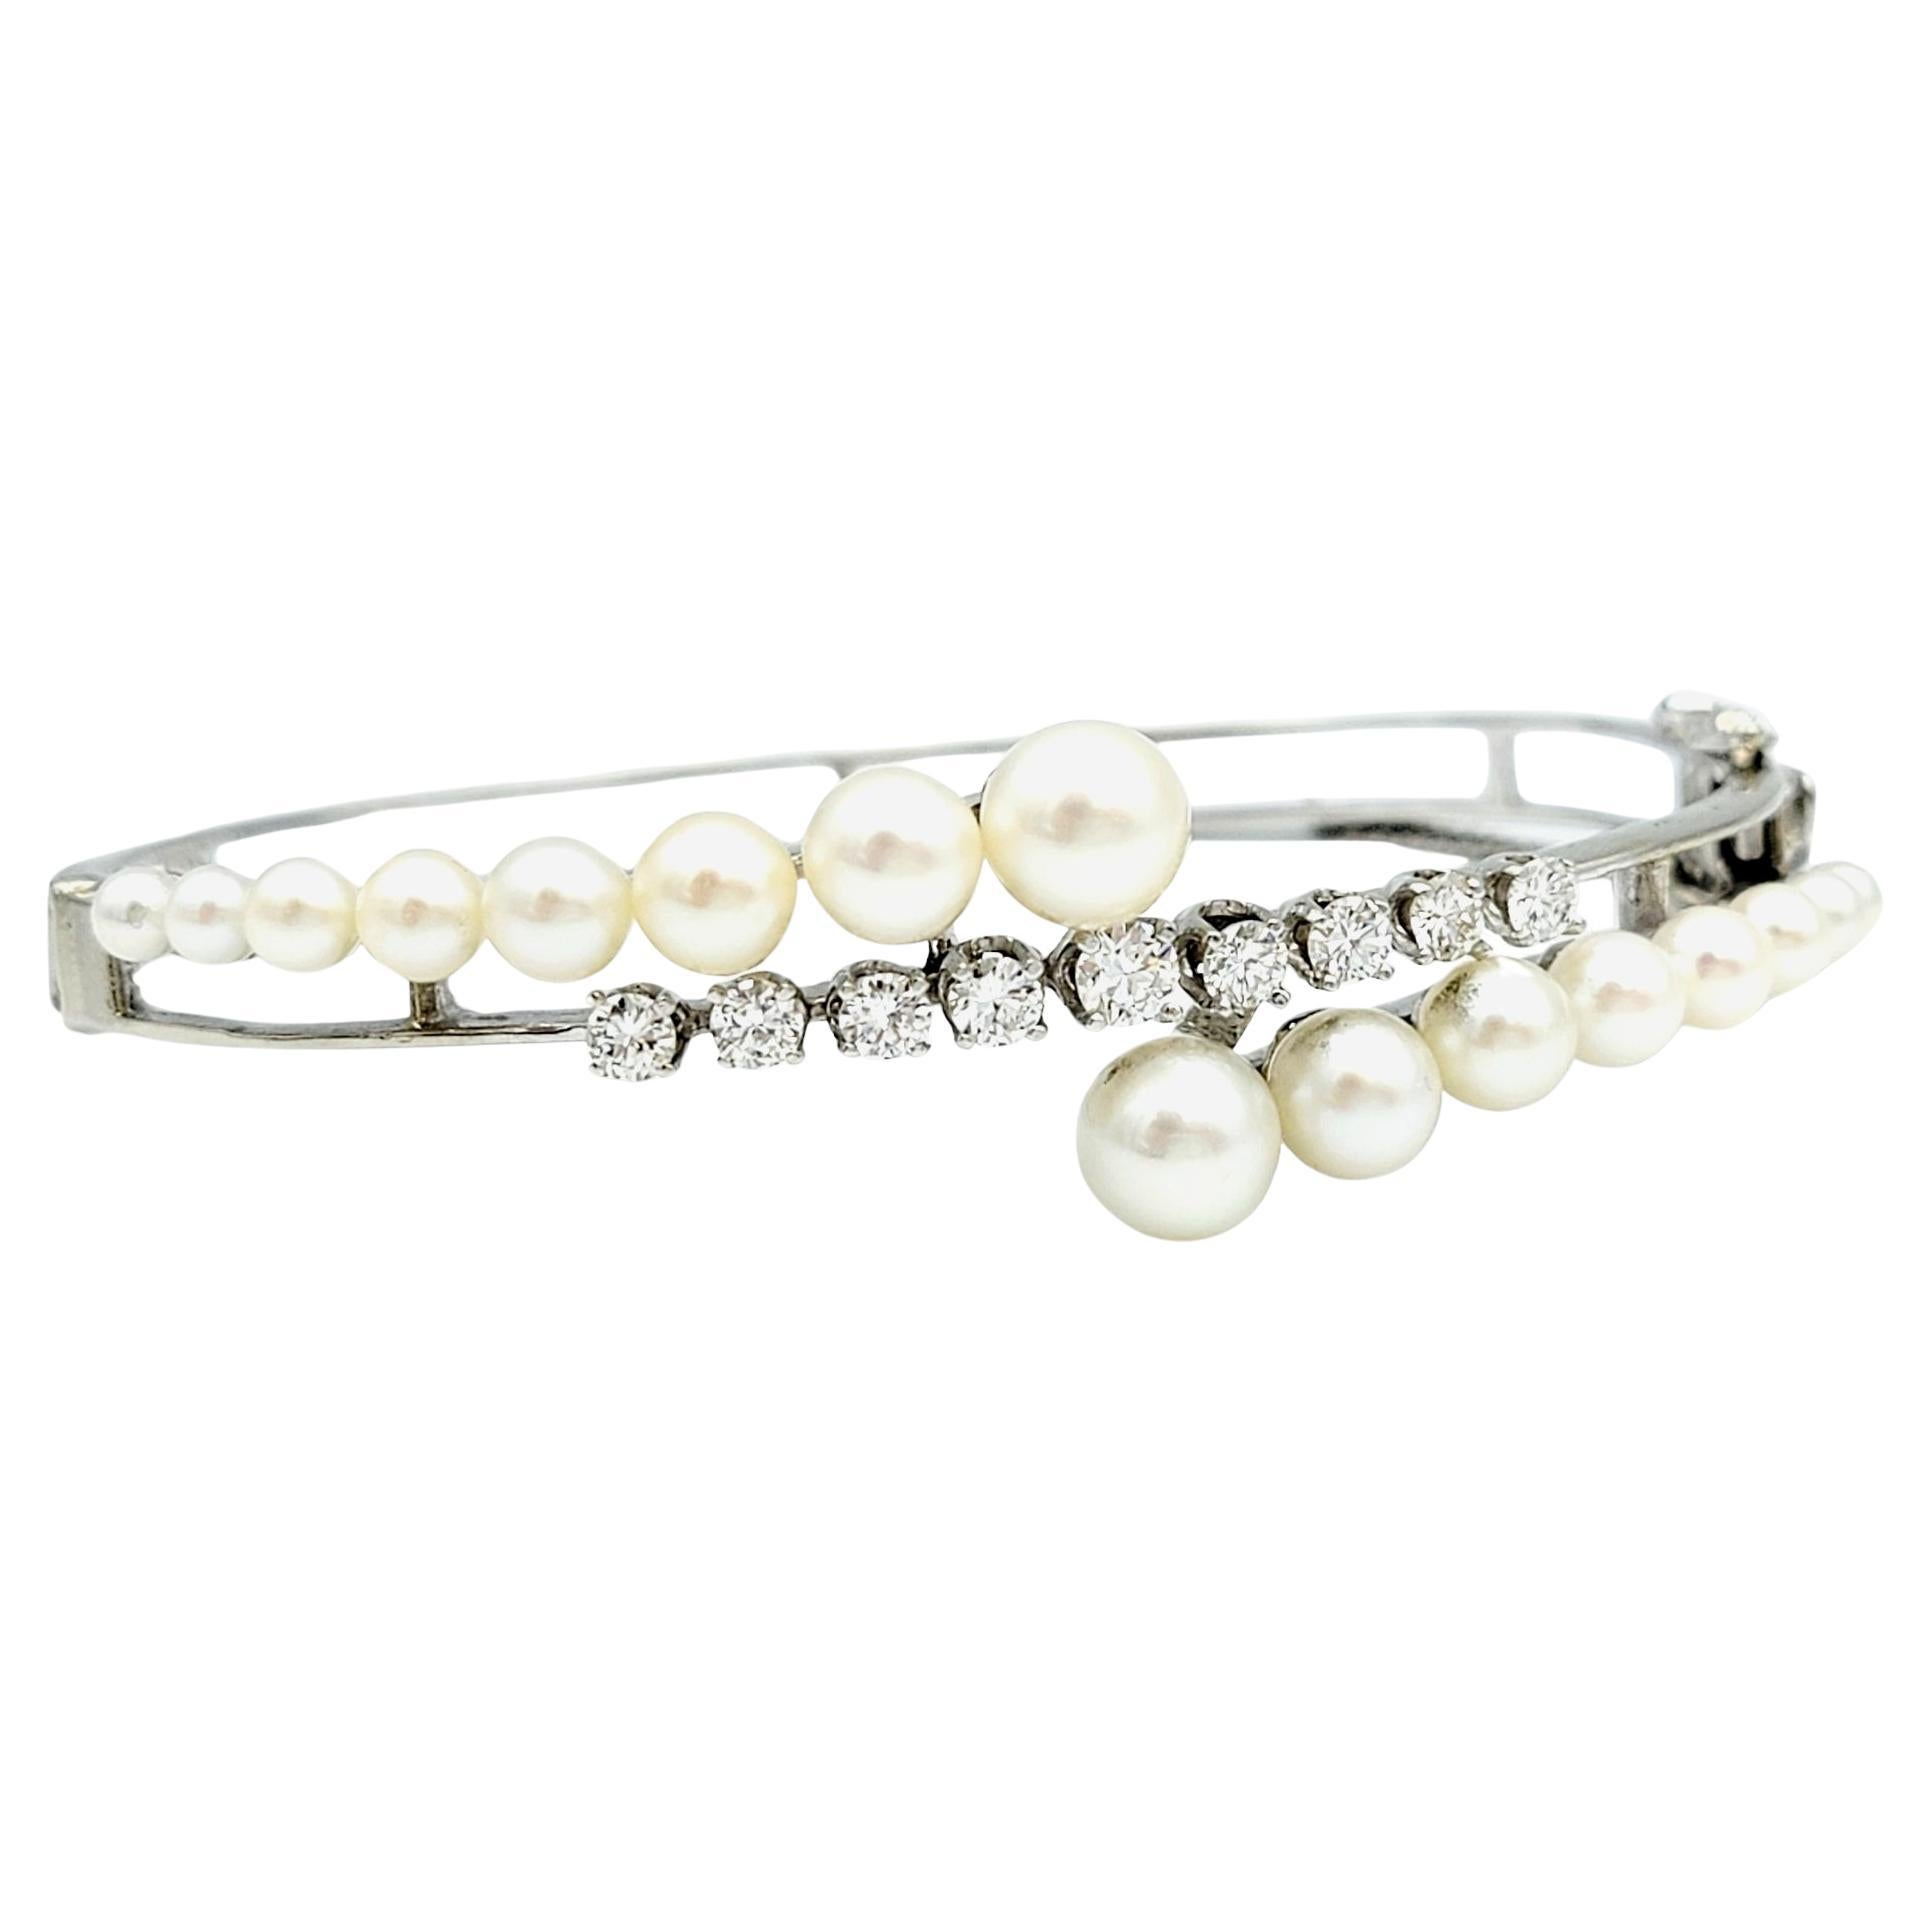 This 14 karat white gold hinged bangle bracelet is a true work of art, seamlessly blending classic elegance with modern design elements. The focus of this exquisite bracelet features an open framework of pearls and diamonds in a captivating